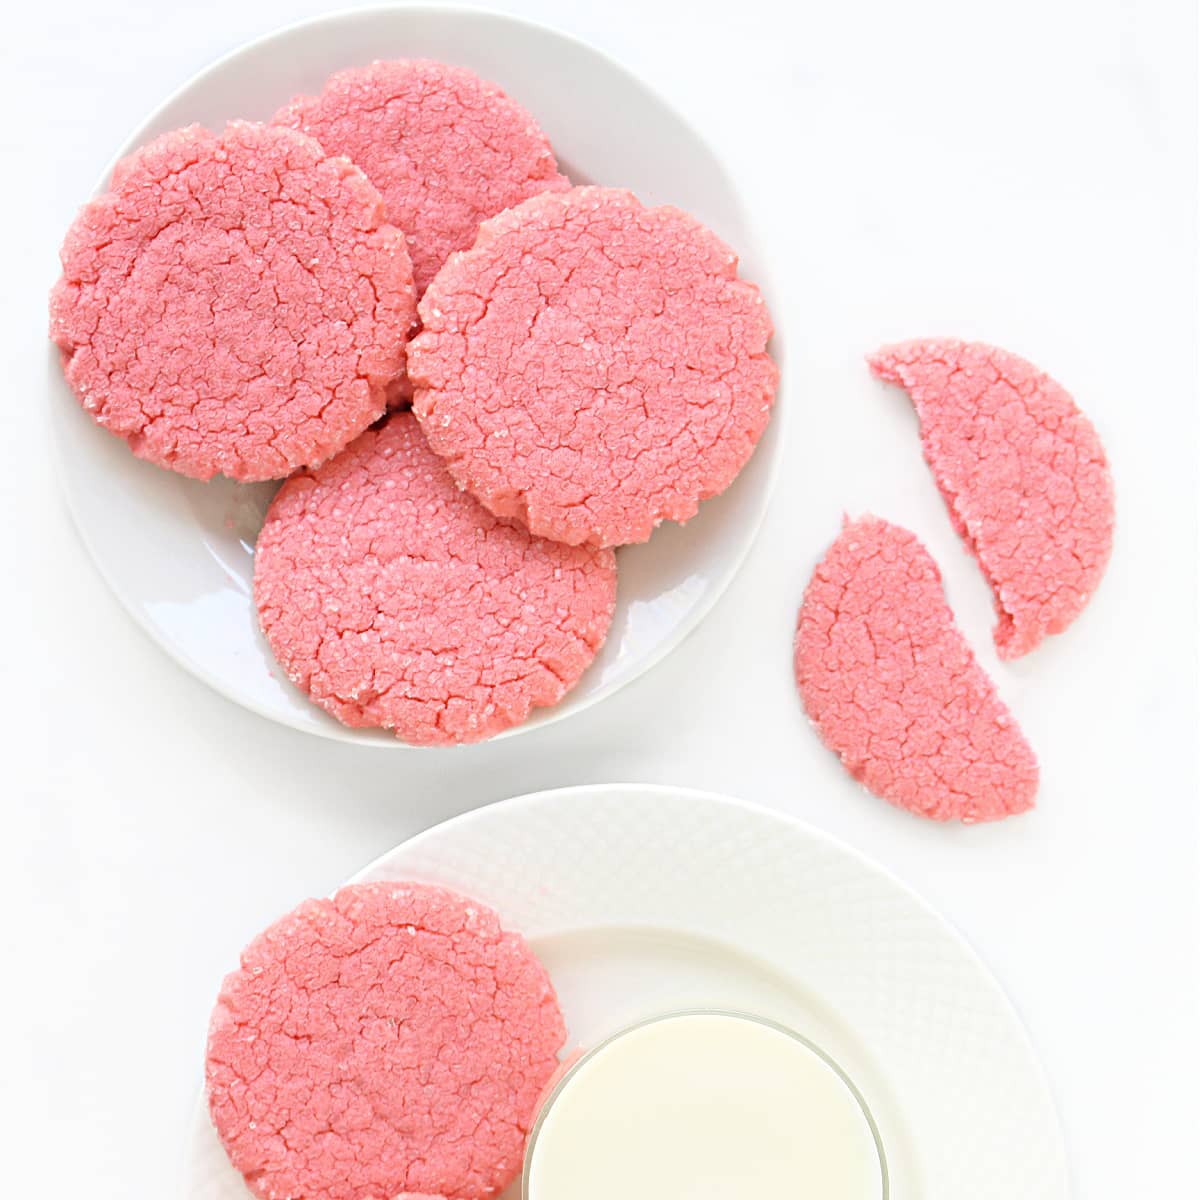 Pink polvorones cookies on a plate.